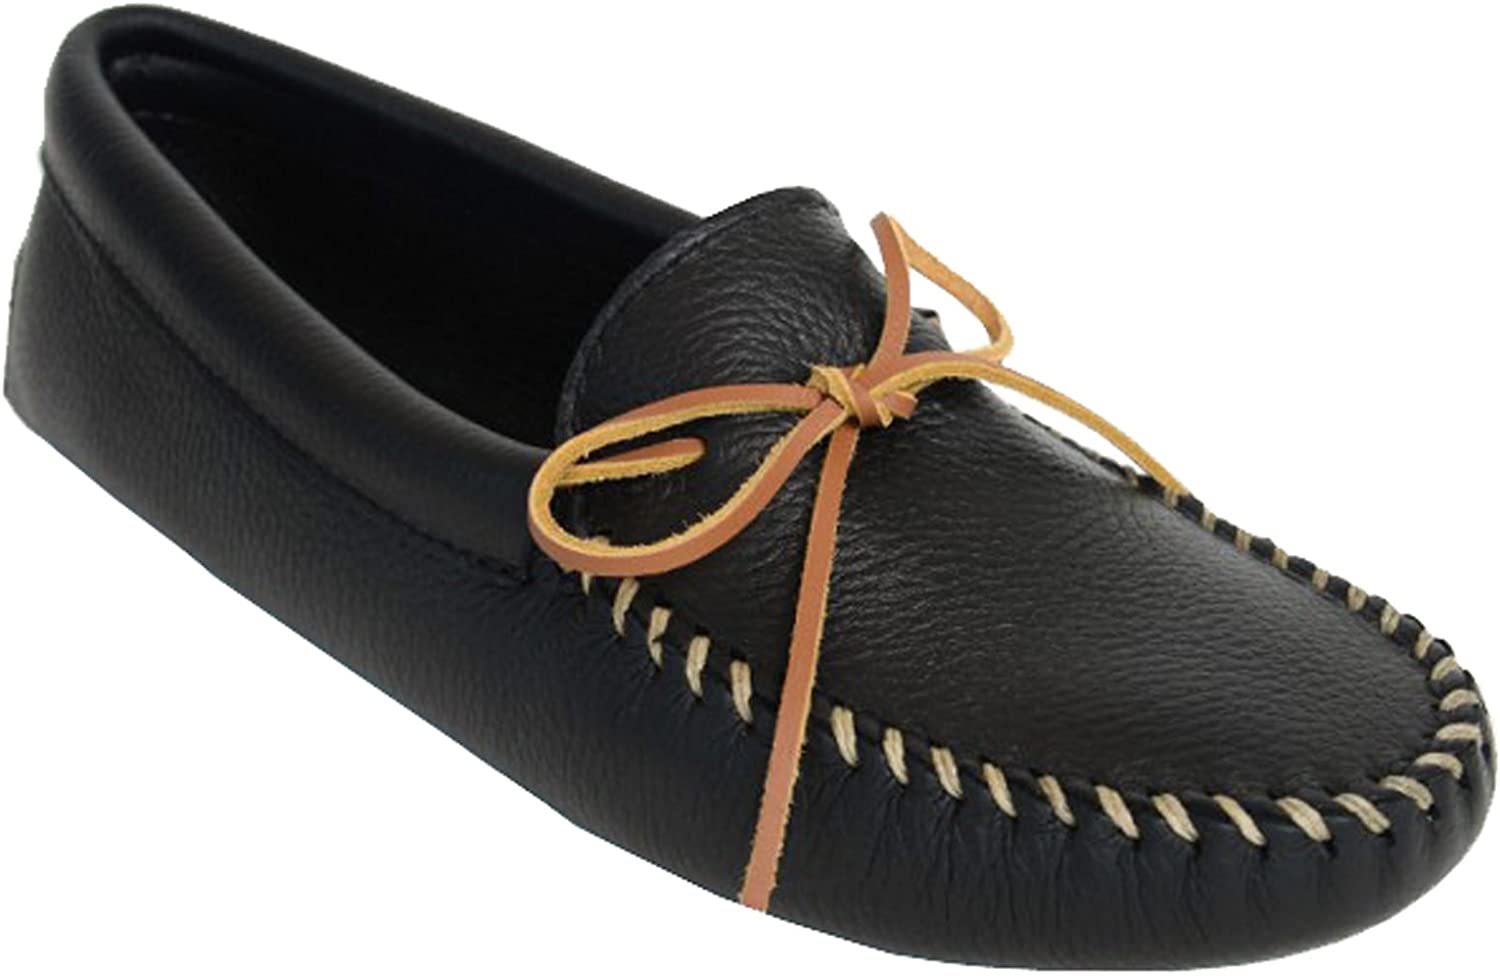 Double Deerskin Softsole Moccasin in Black from 3/4 Angle View